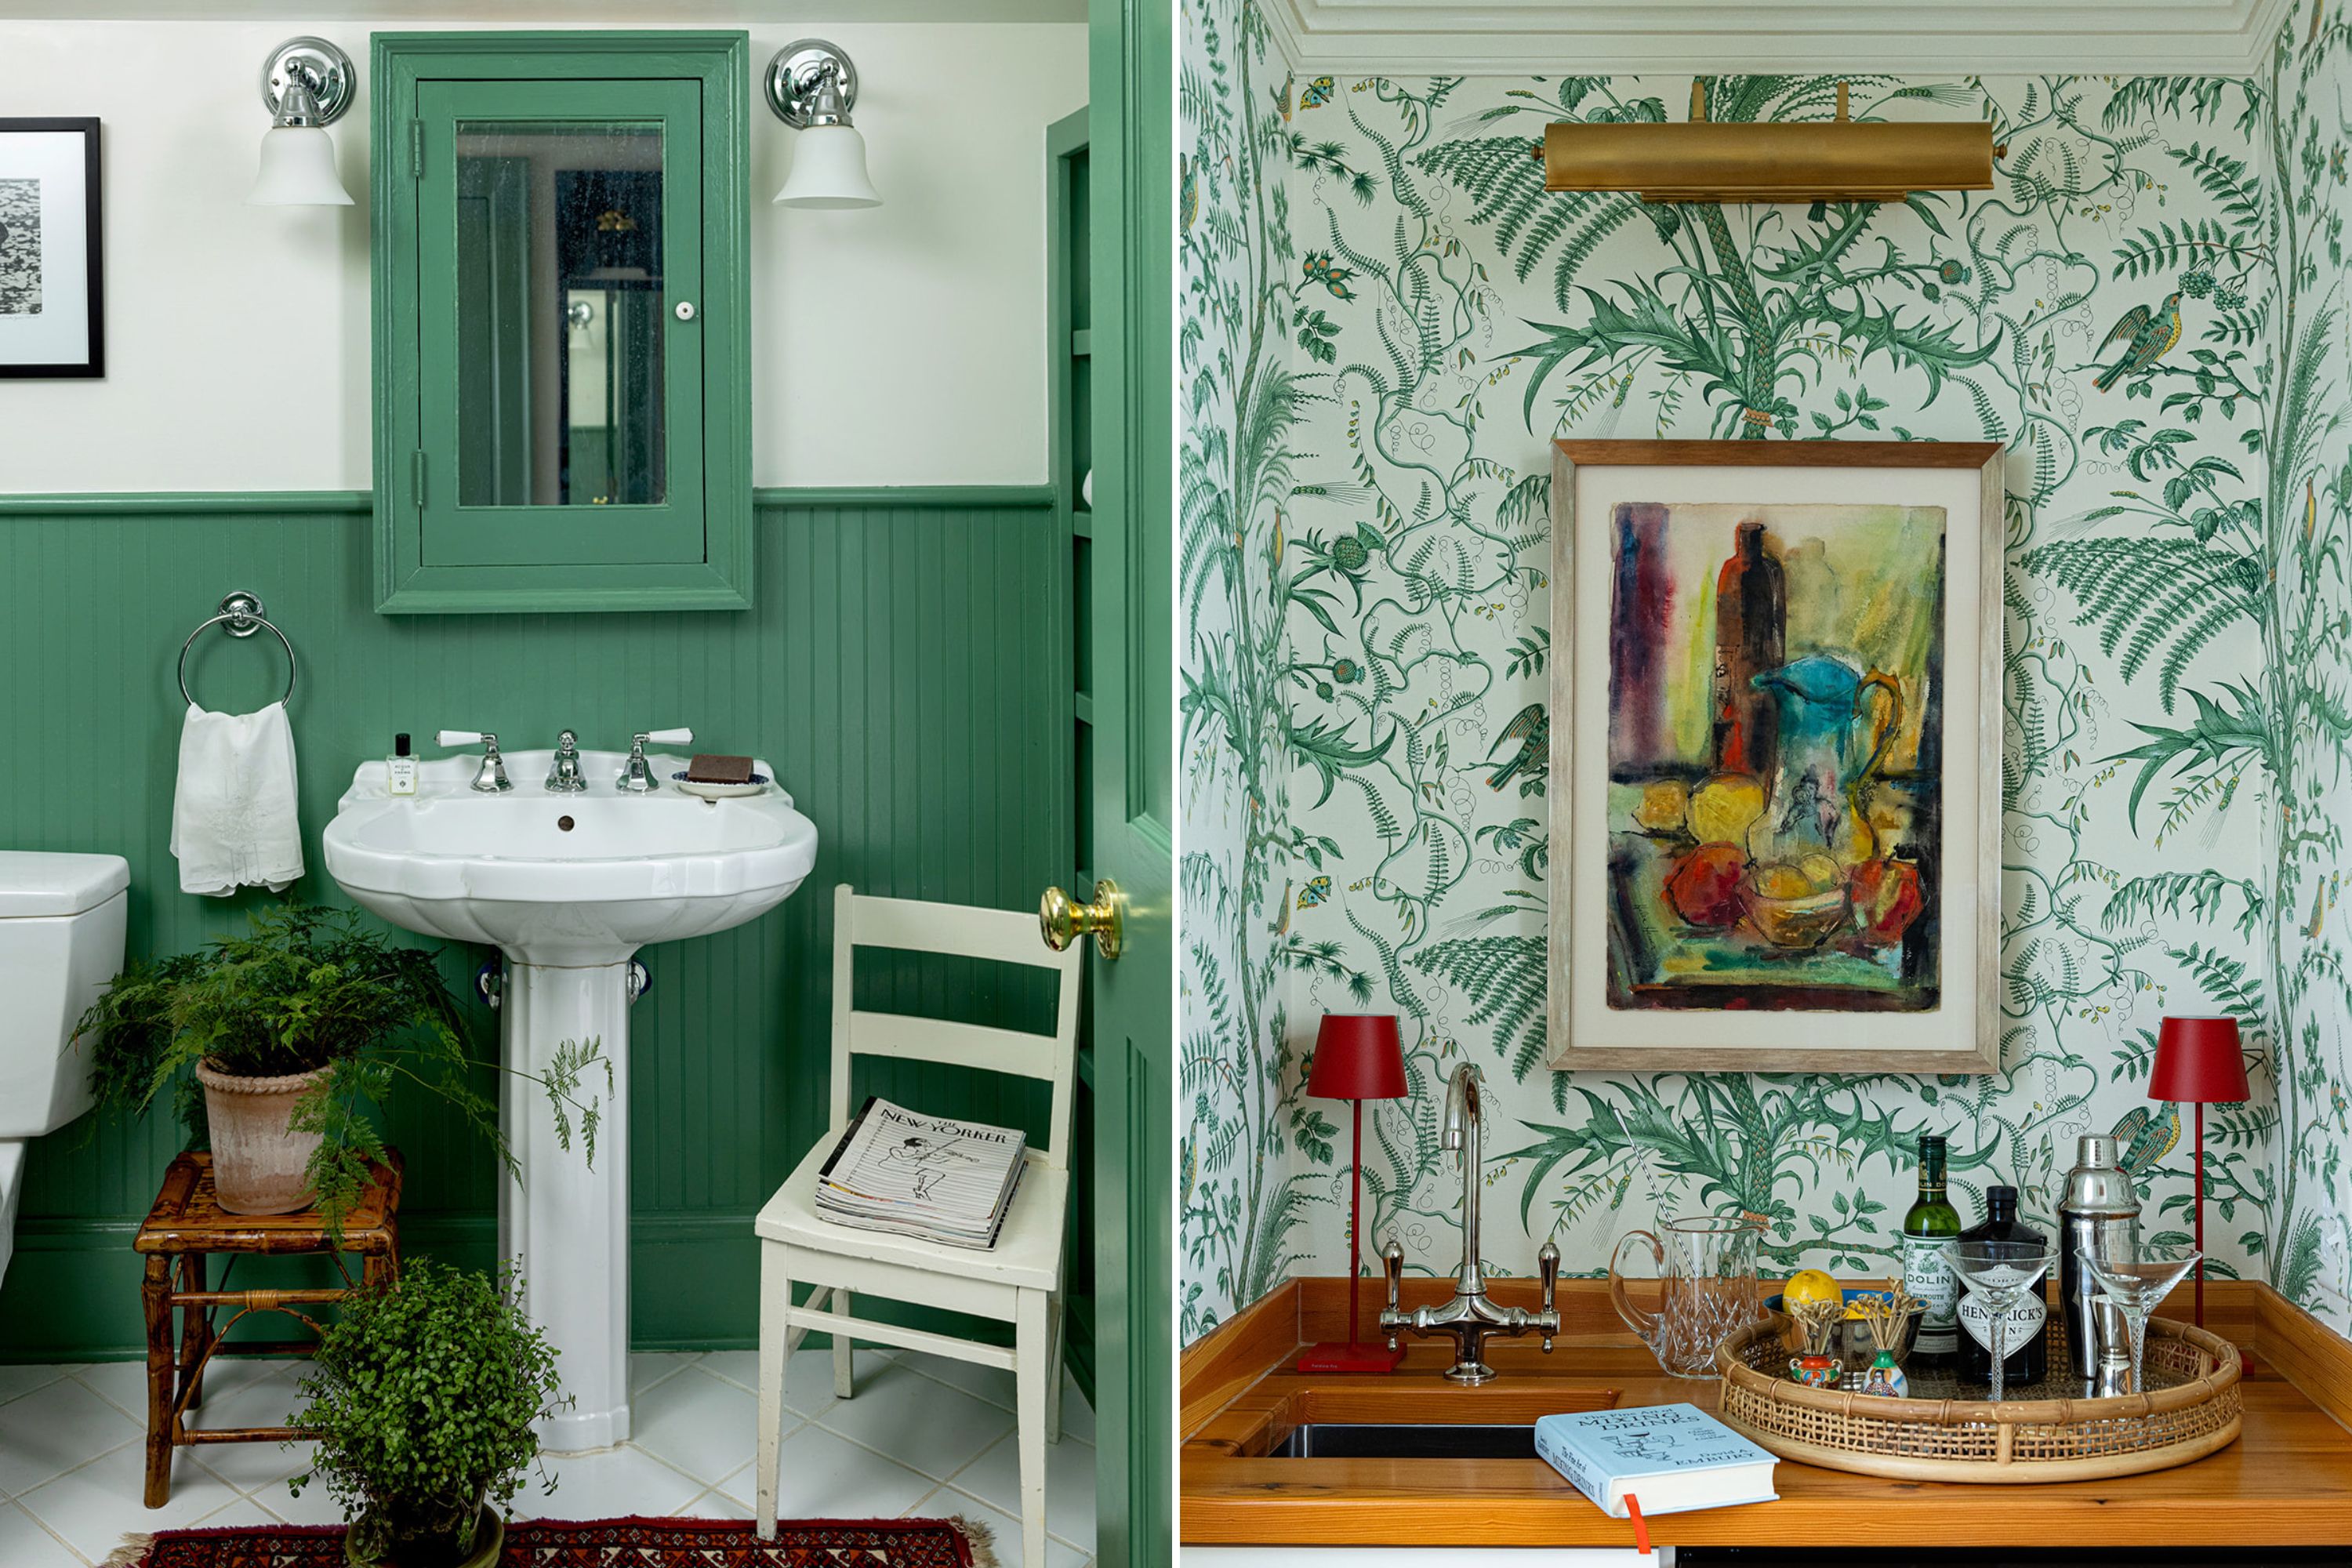 A green bathroom with chairs and a medicine cabinet; a wet bar with a wood top and floral wallpaper.